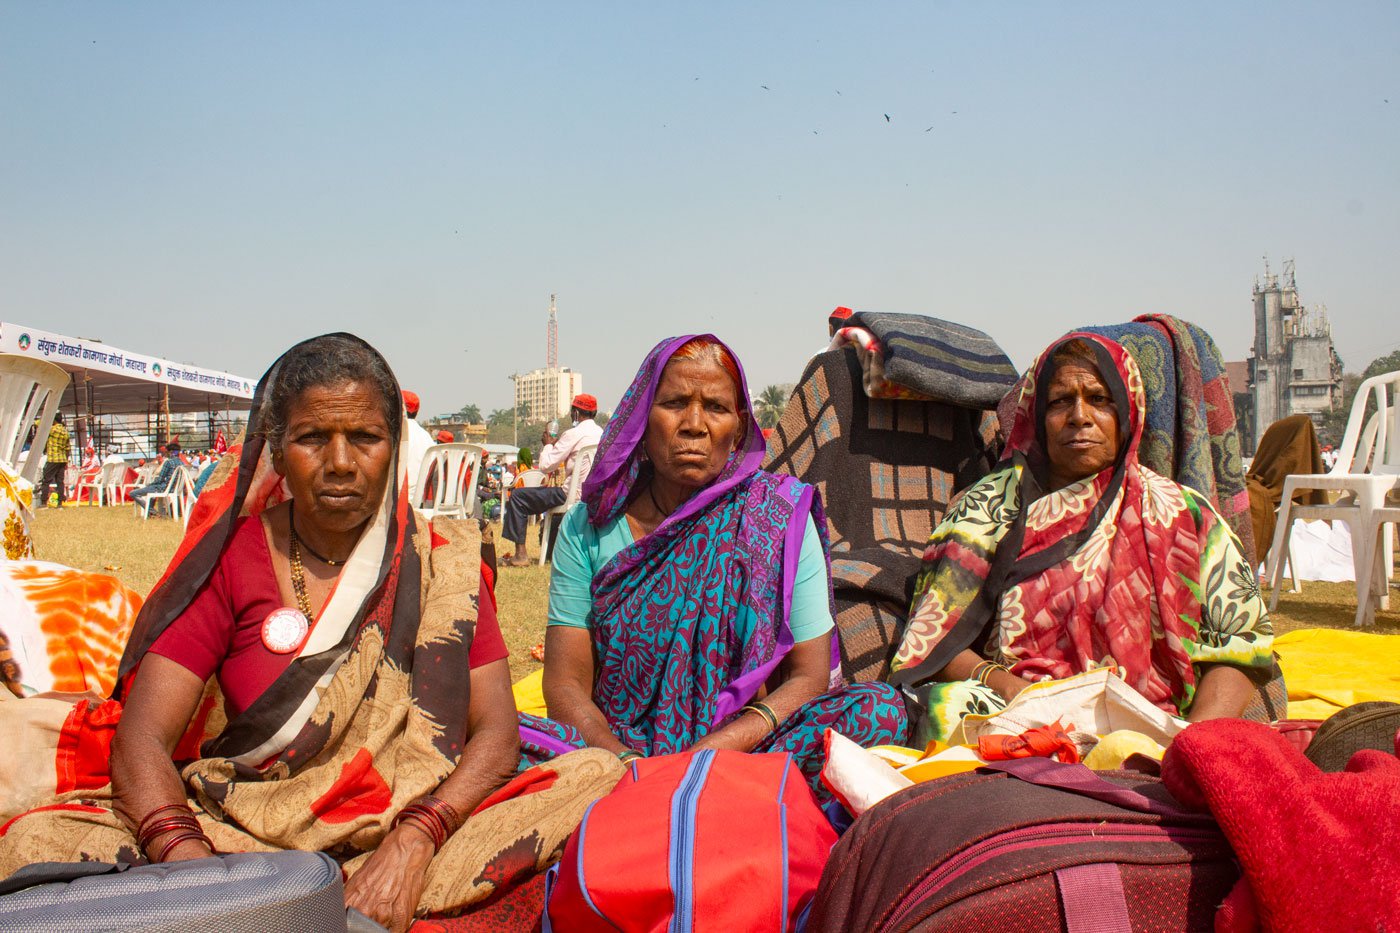 Despite land rights being the main concern for Bhima Tandale, Suman Bombale and Lakshmi Gaikwad – Adivasi farm widows from Nashik – they are in Mumbai to support the protest against the new farm laws